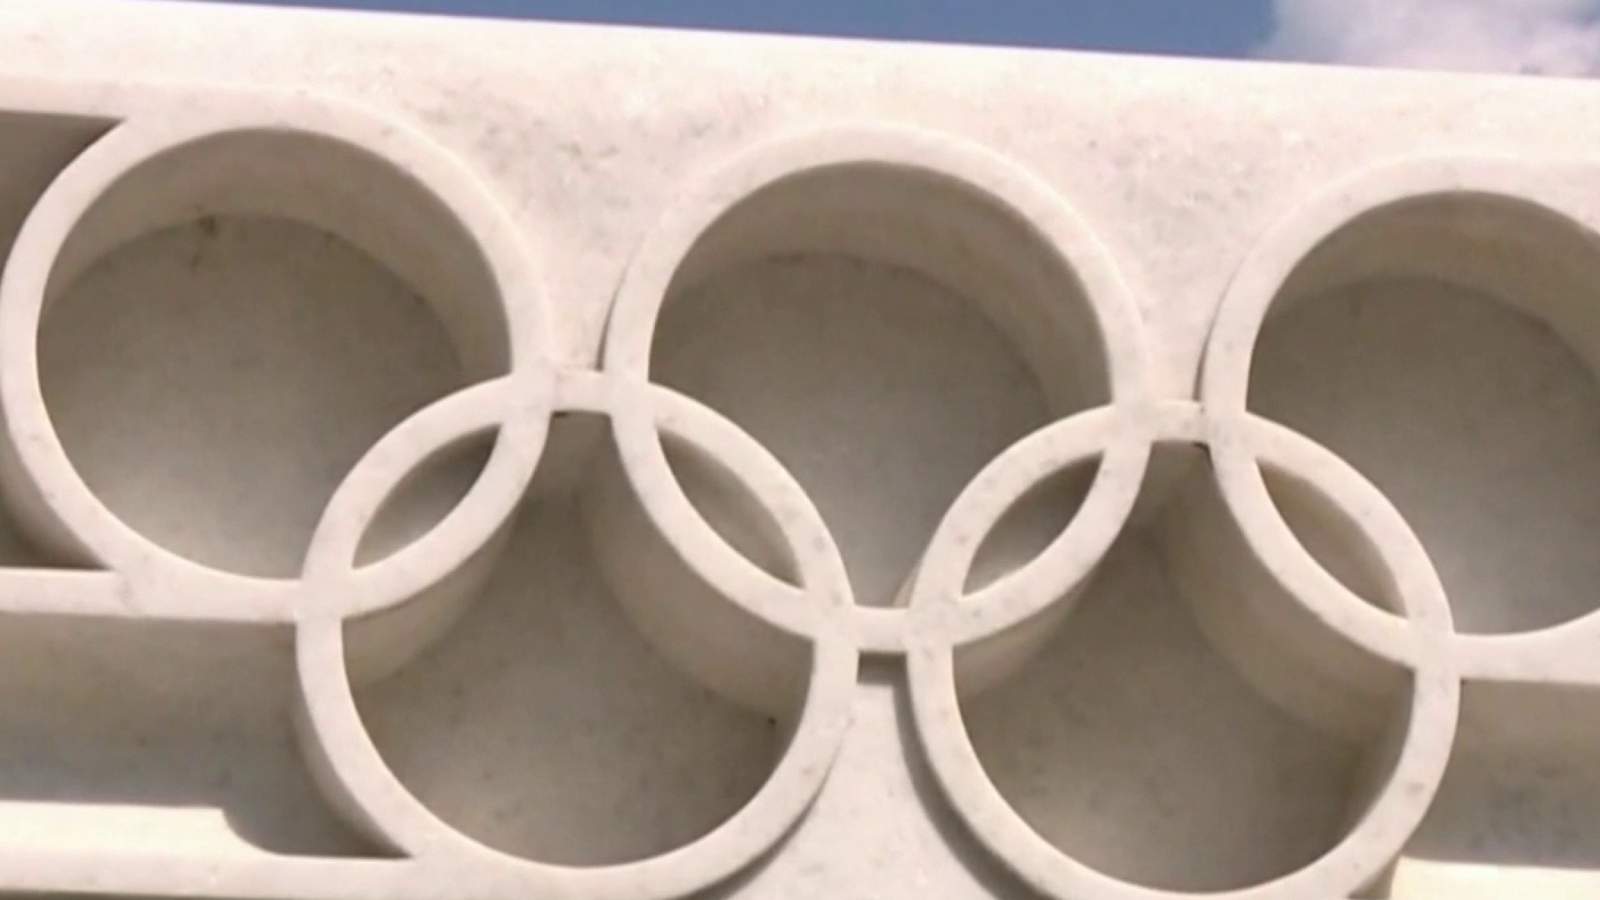 Athletes, fans cautiously optimistic that Olympics will go on in 2021